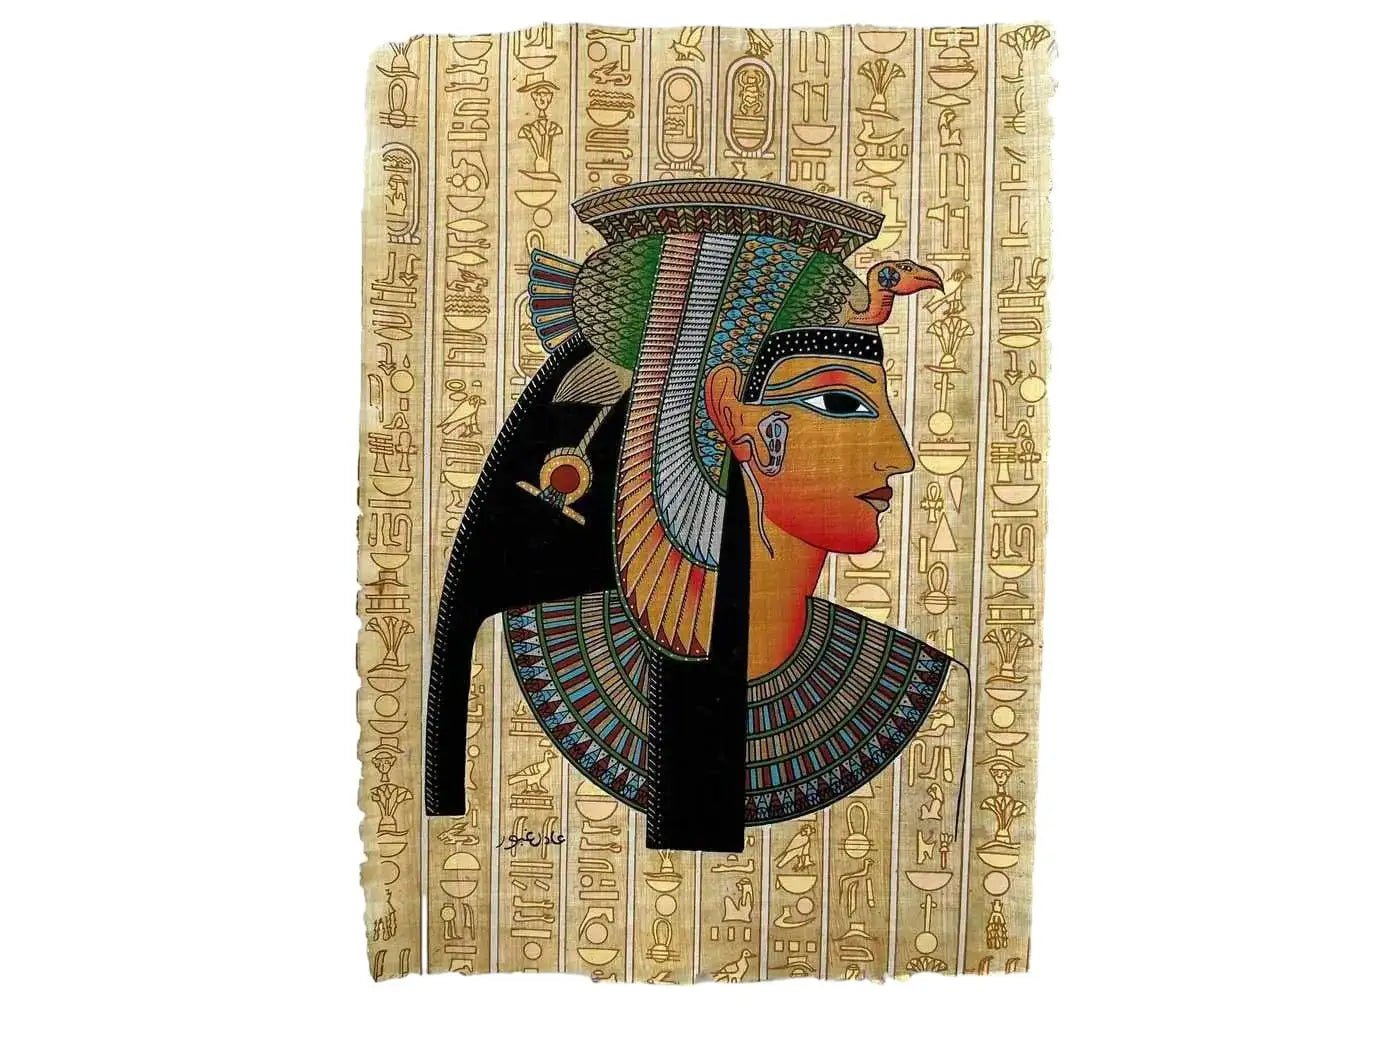 egyptian paintings of cleopatra